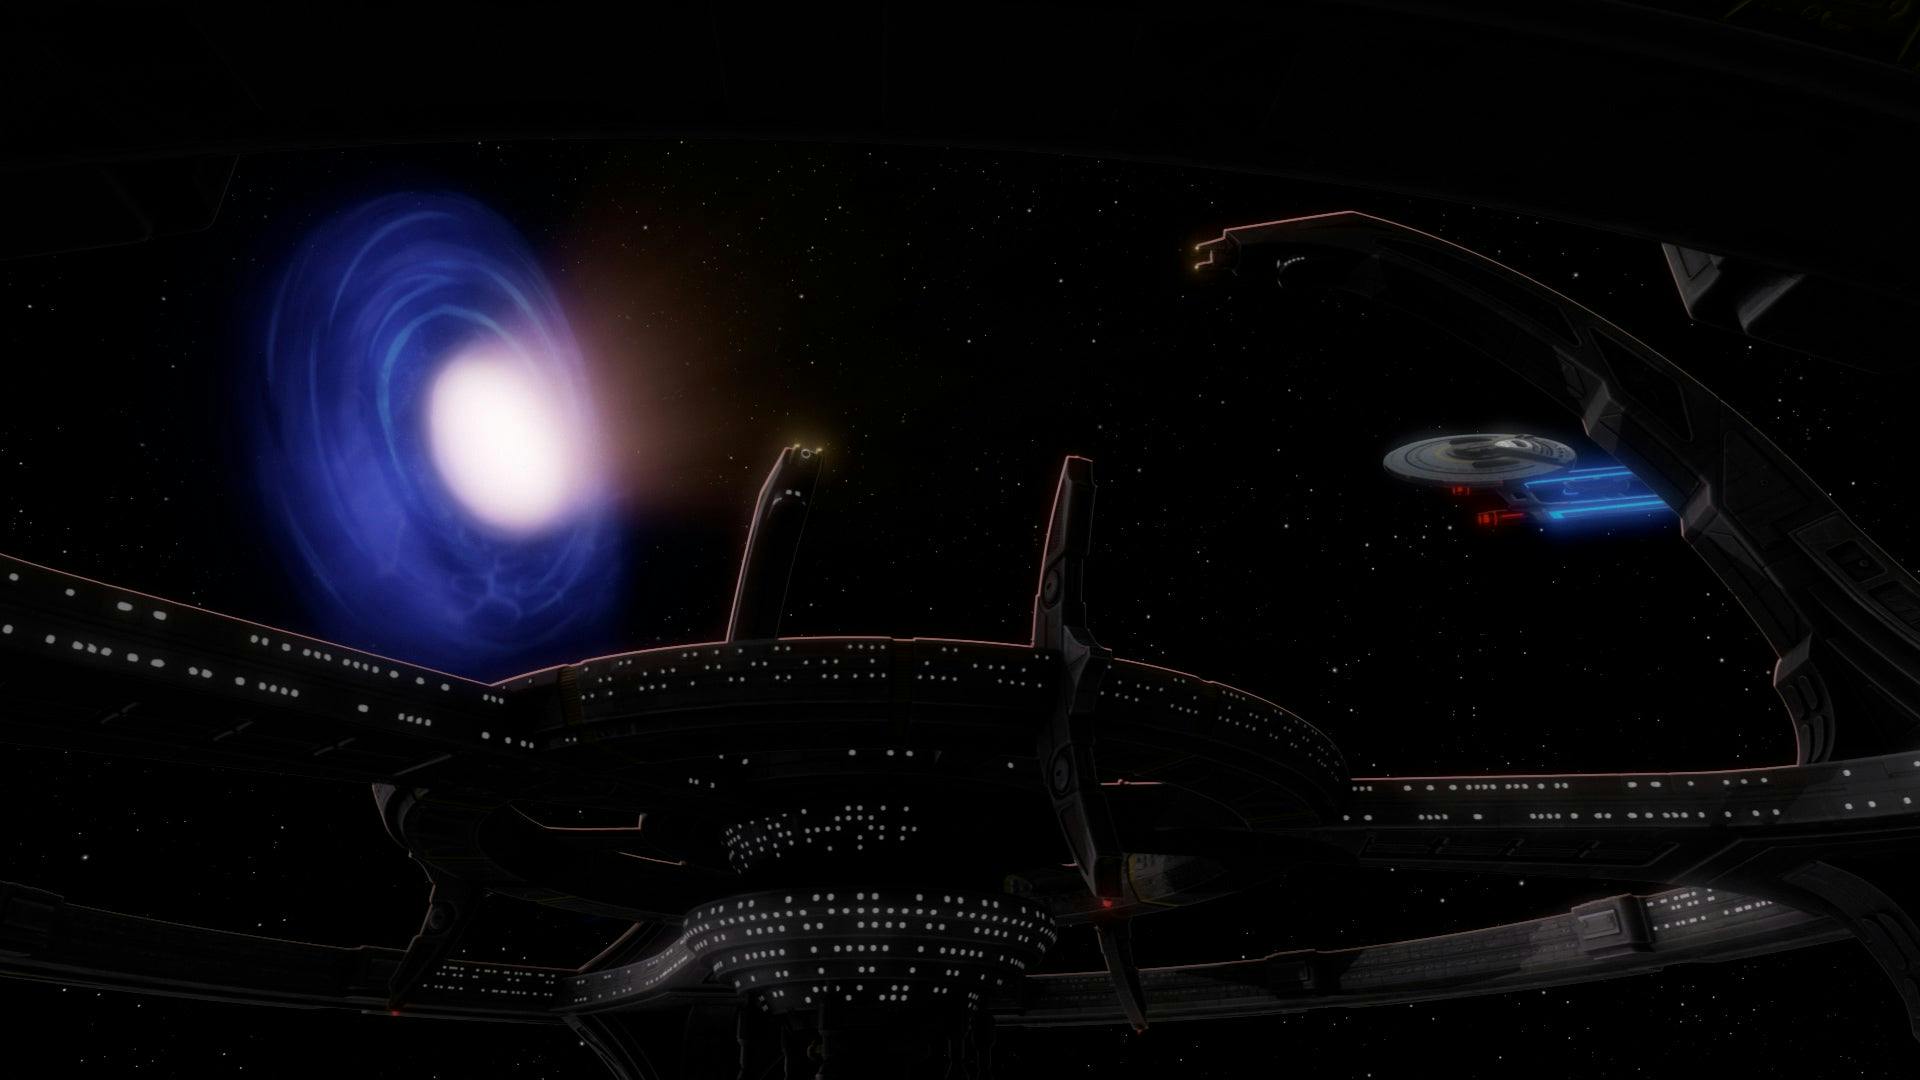 Star Trek: Lower Decks animated still of the Cerritos docking at Deep Space 9 with the worm hole